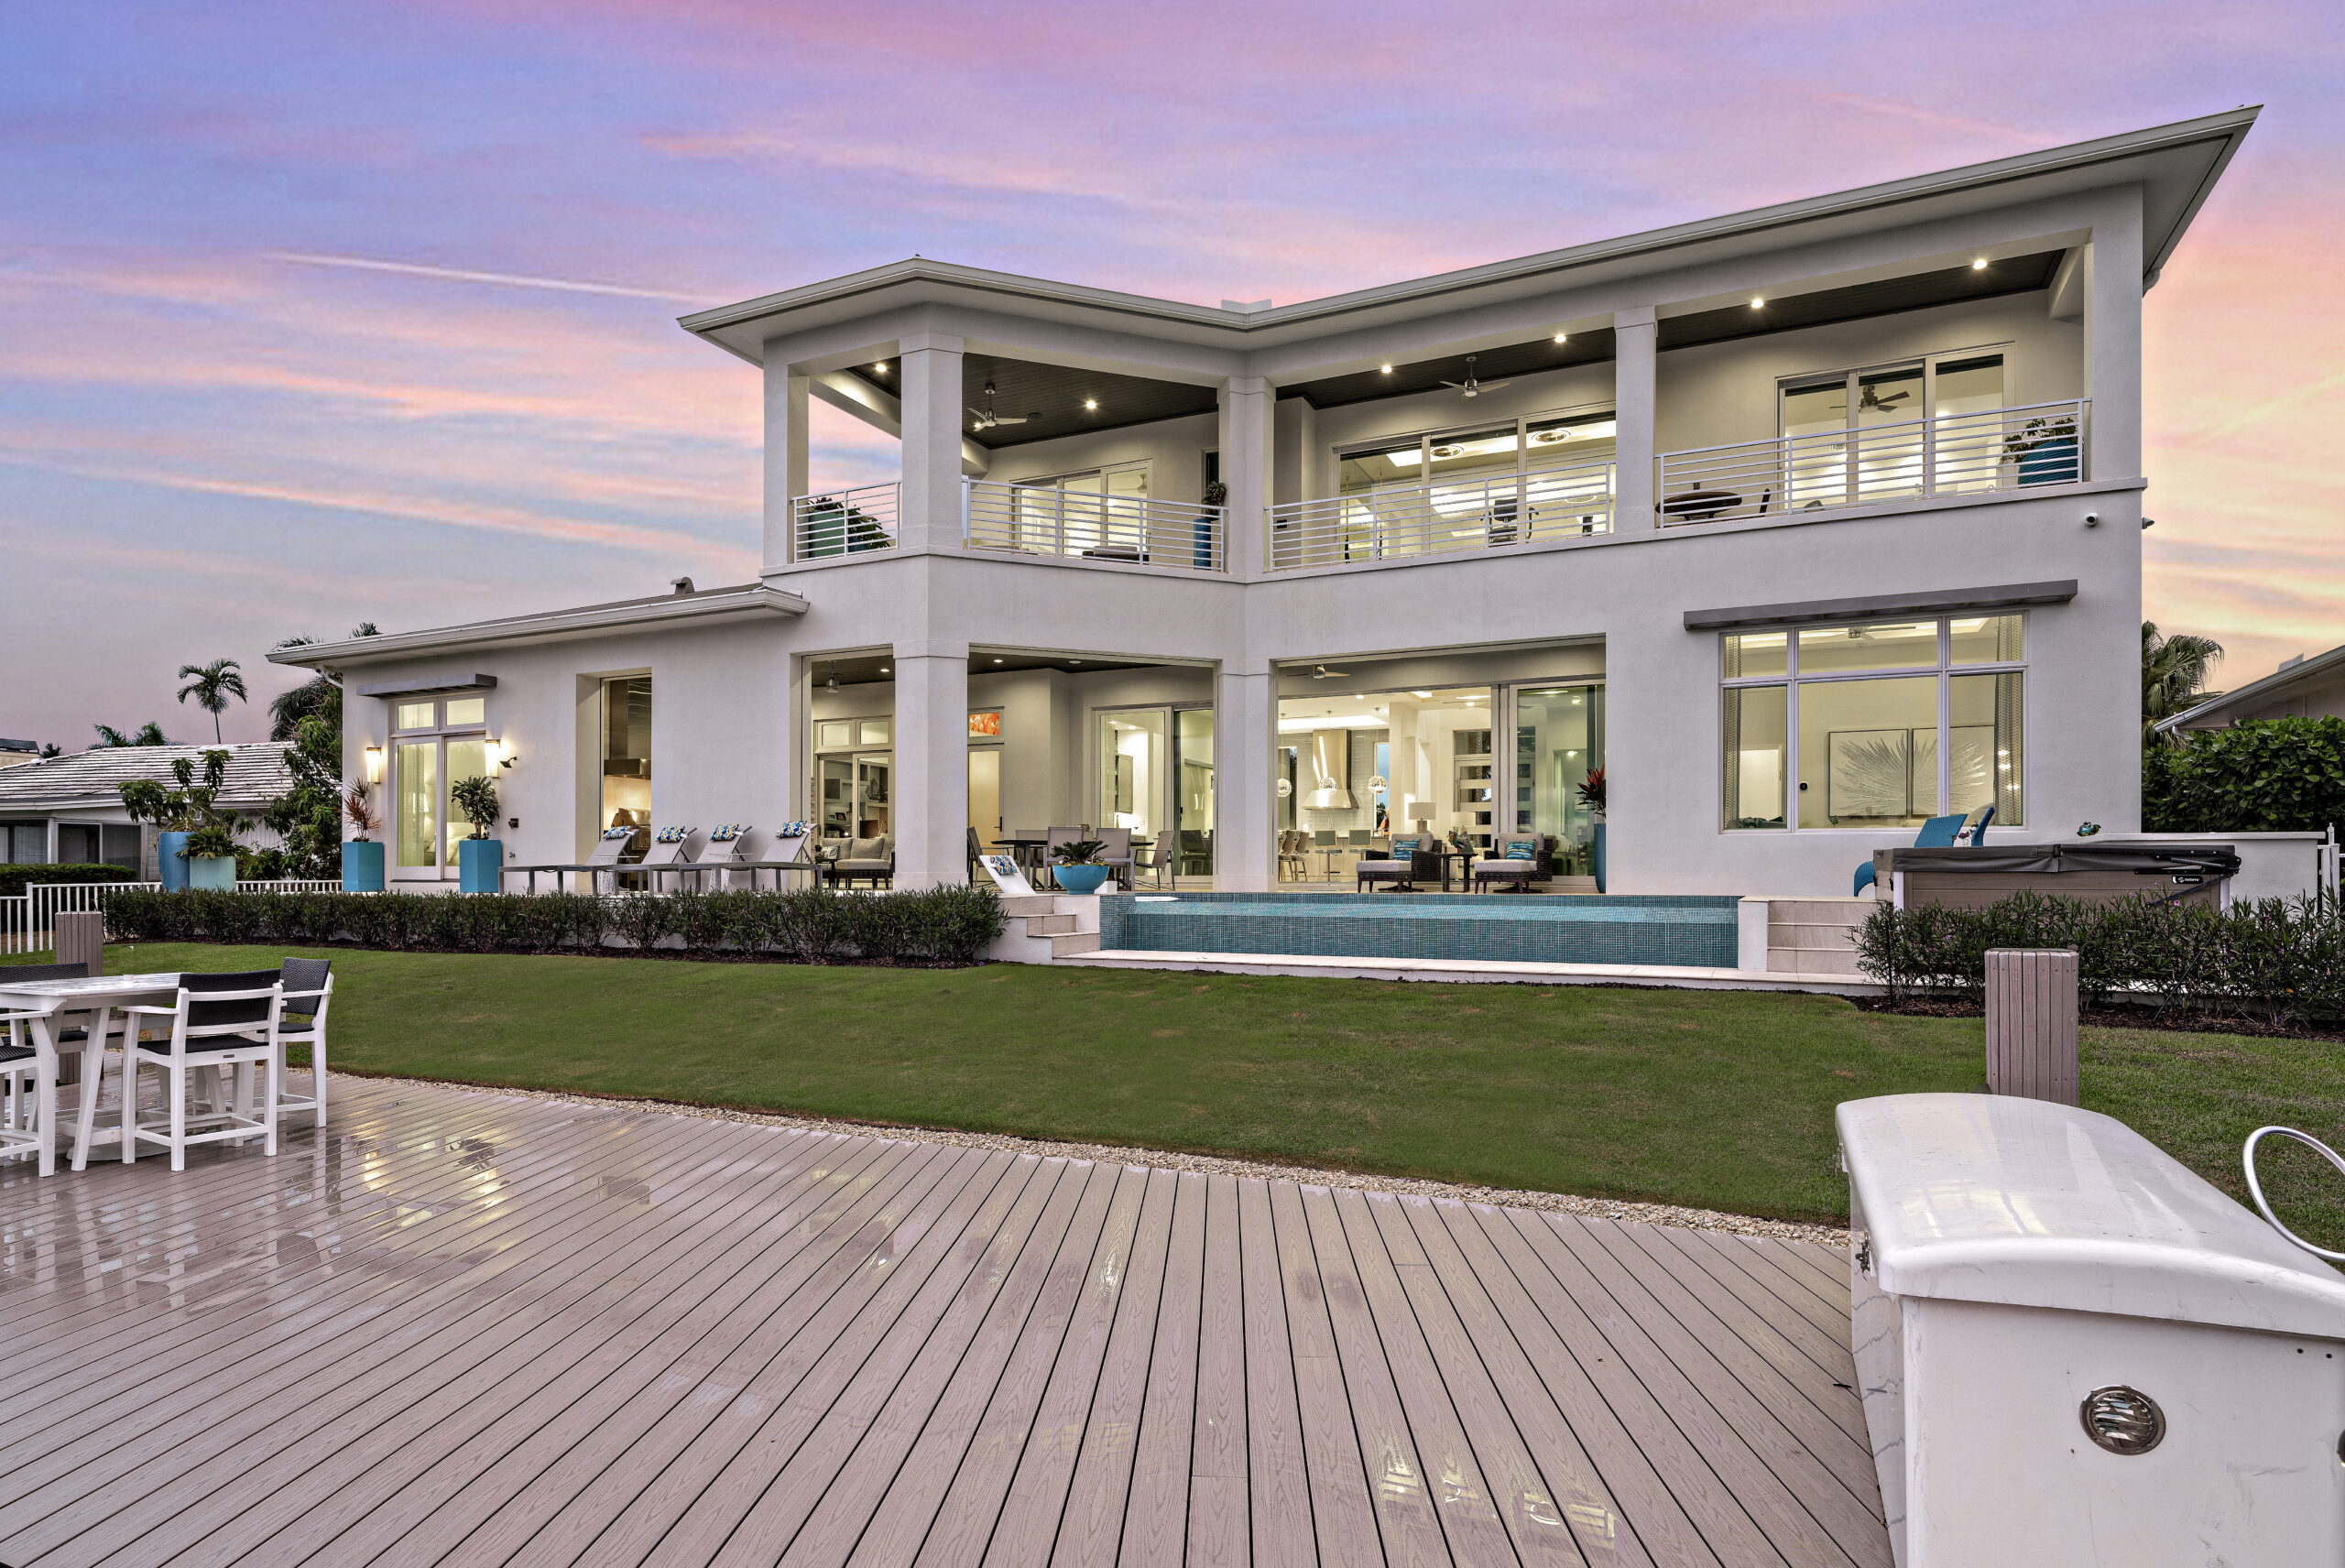 home at dusk to convey property management Marco Island